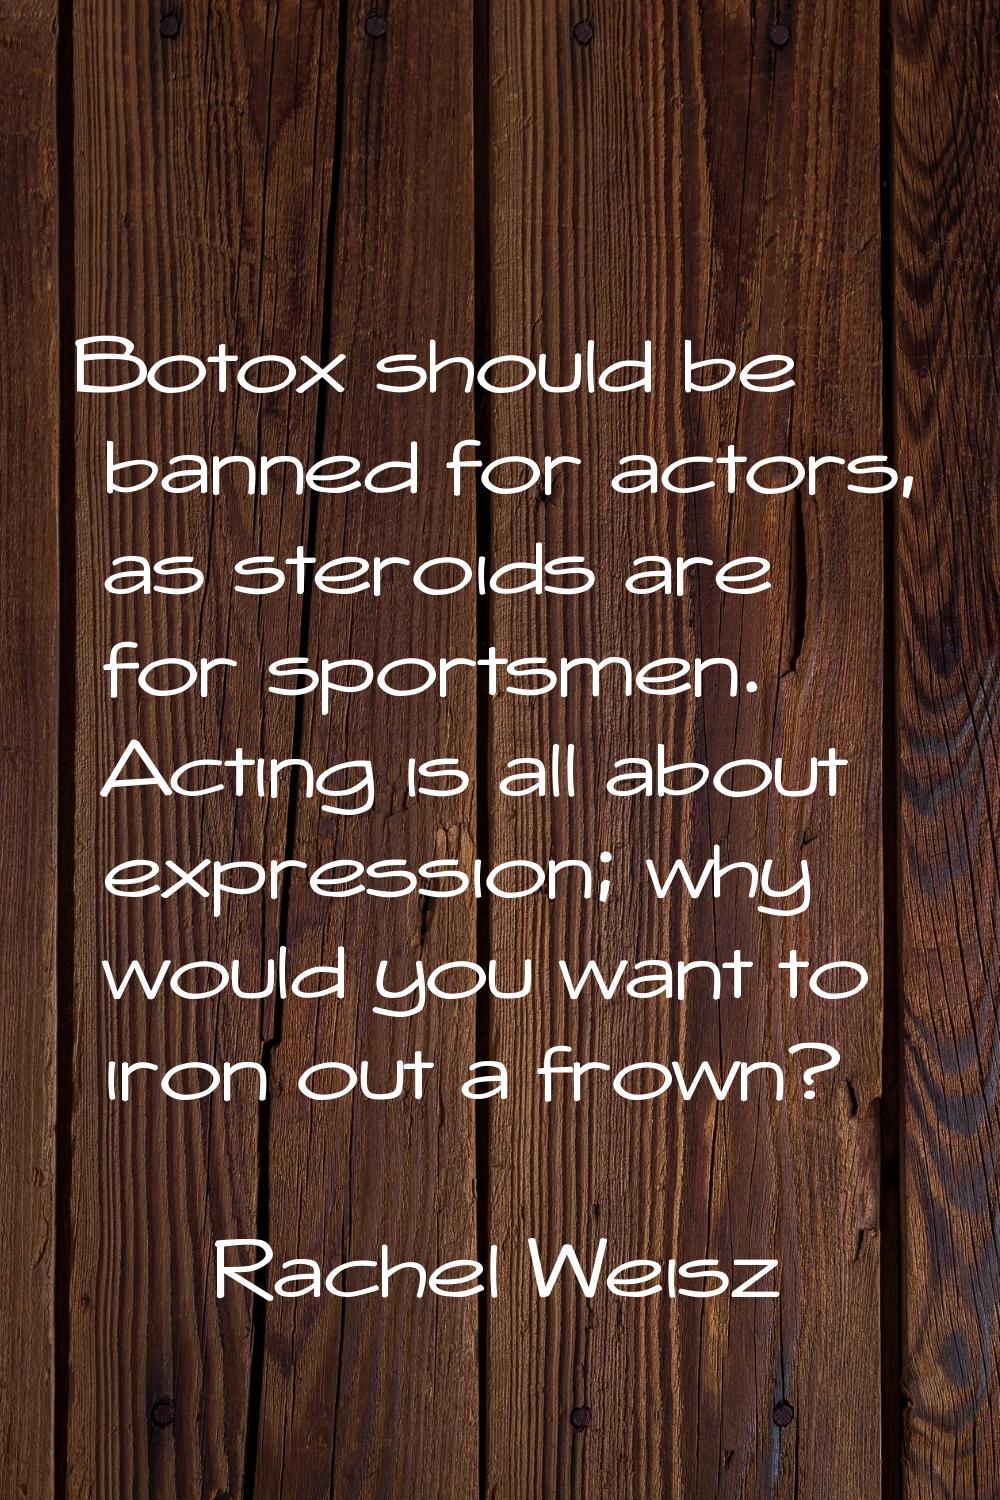 Botox should be banned for actors, as steroids are for sportsmen. Acting is all about expression; w